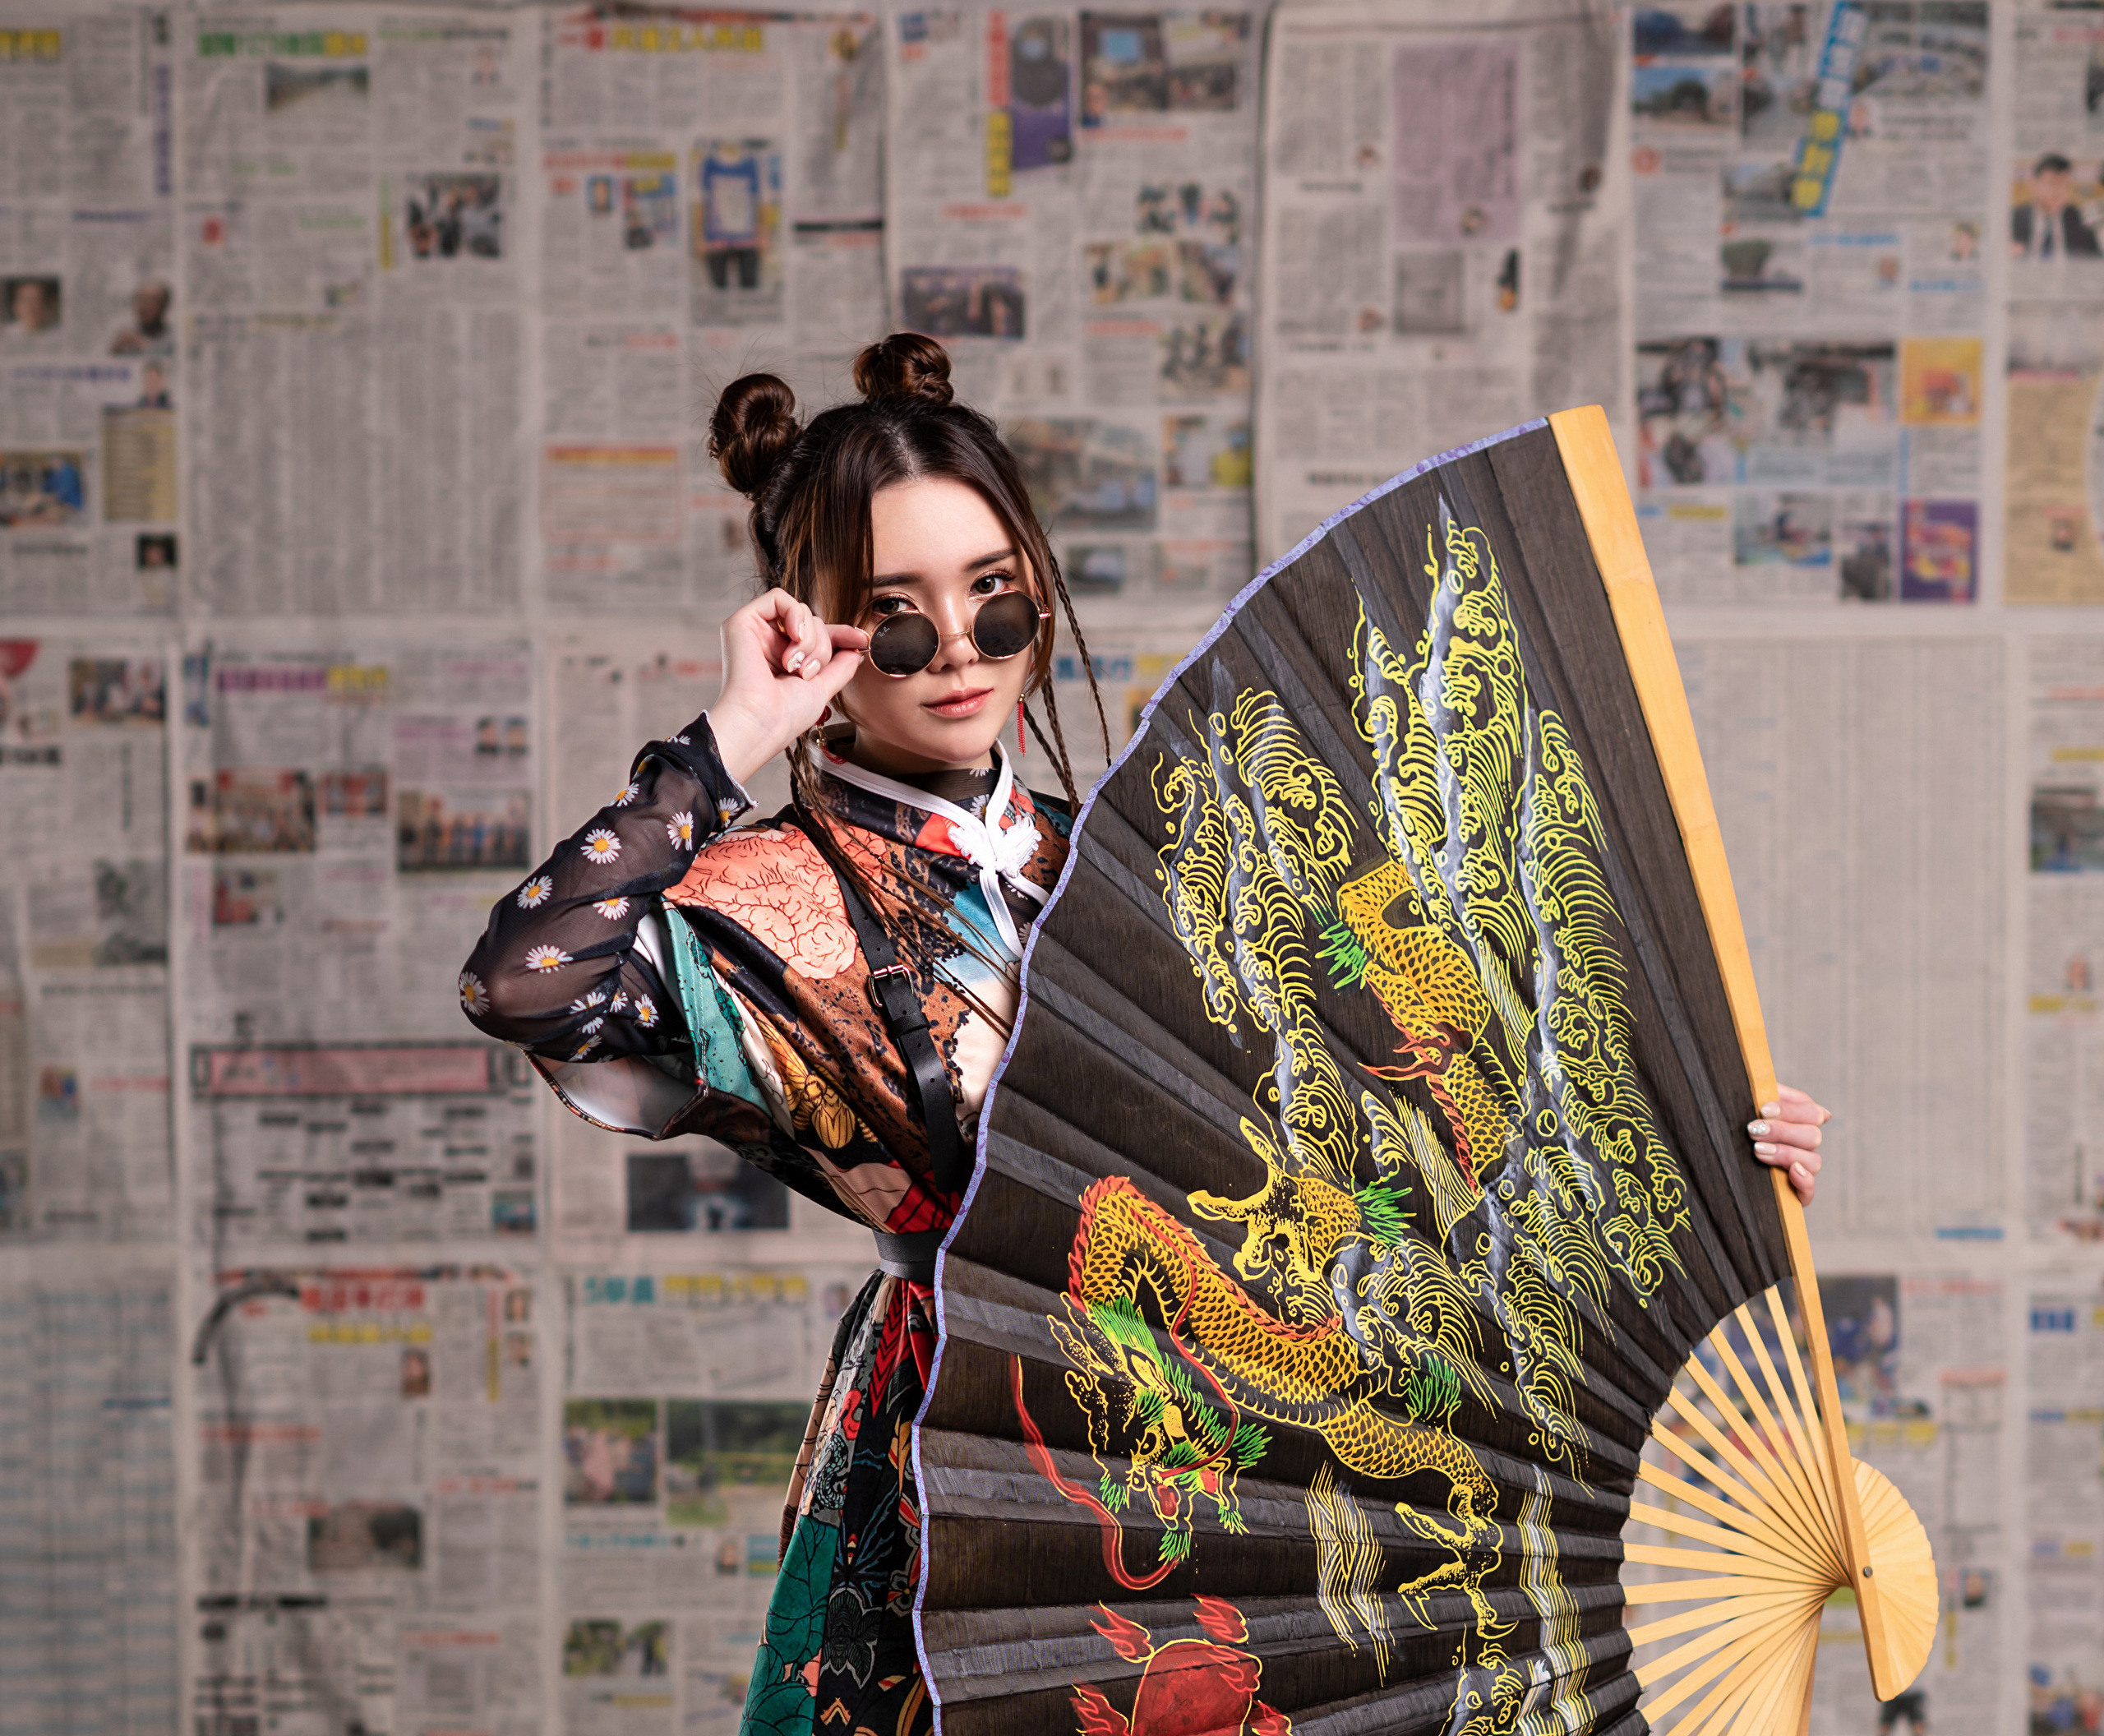 People 2560x2112 Asian model women brunette traditional clothing sunglasses hair knot hand fan newspapers women with shades